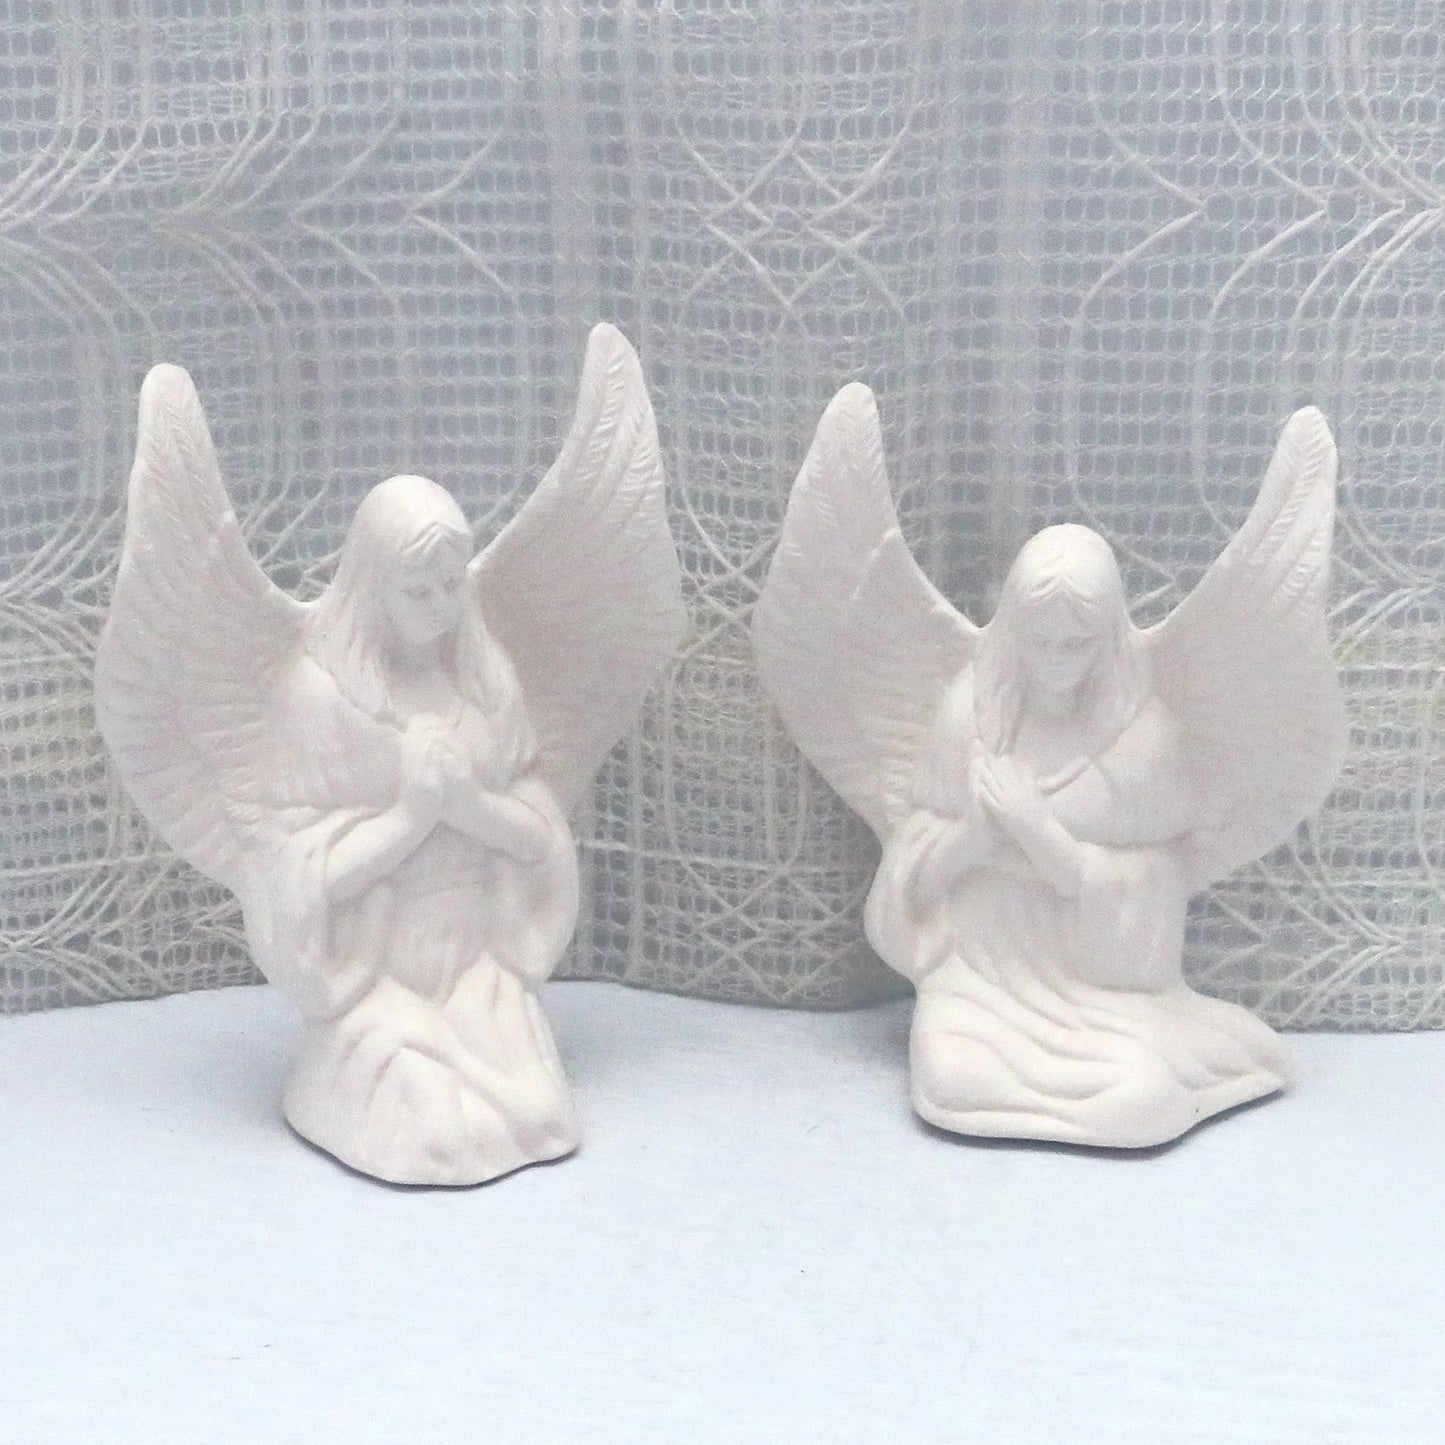 Handmade ready to paint ceramic angek statues on a blue tablle with an off white lacy curtain behind.  The angels are facing forward